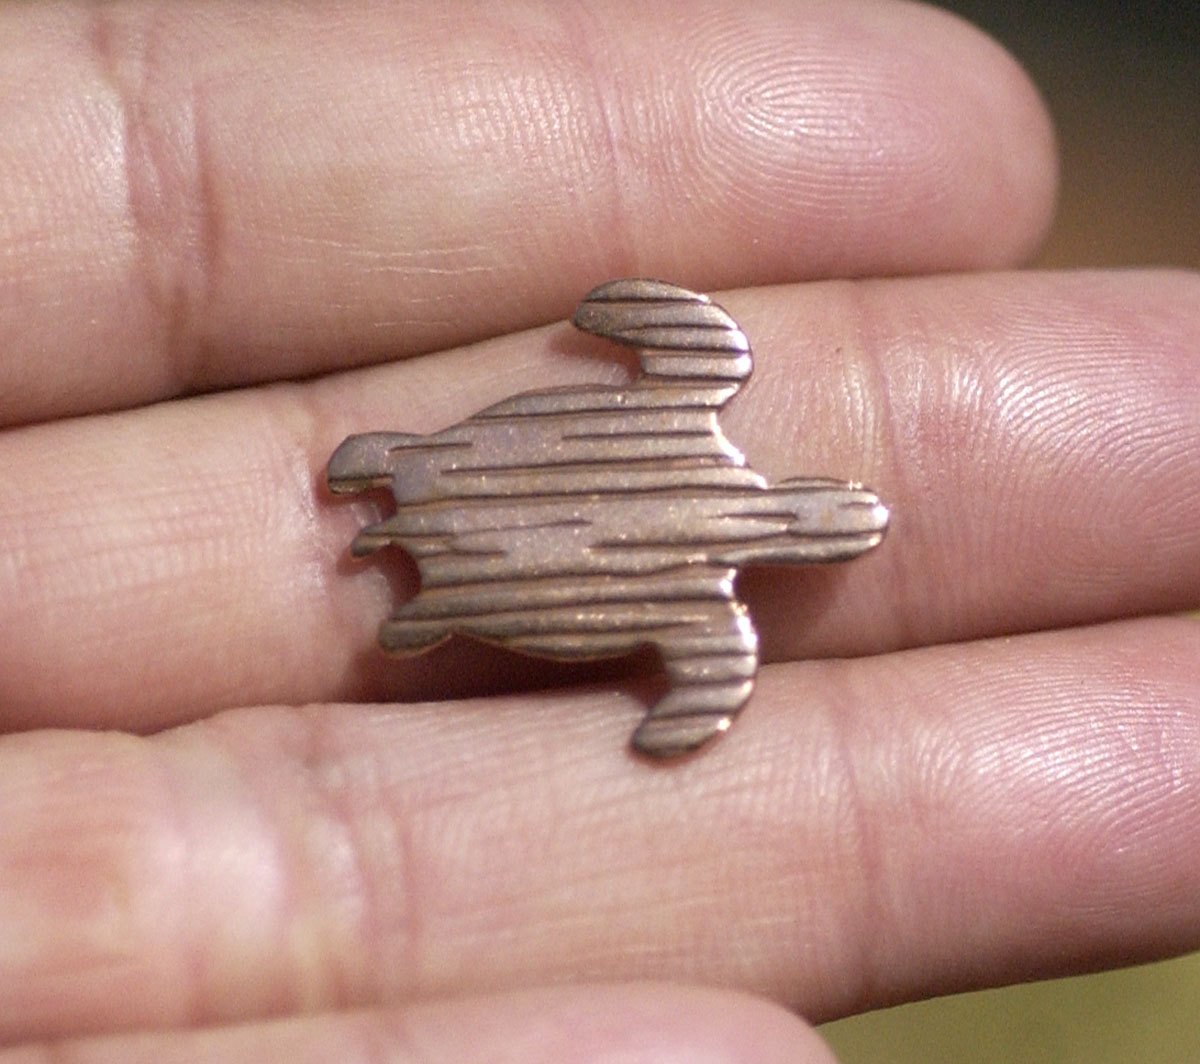 Woodgrain Pattern Turtle 20mm x 23mm for Blanks Enameling Stamping Texturing Variety of Metals